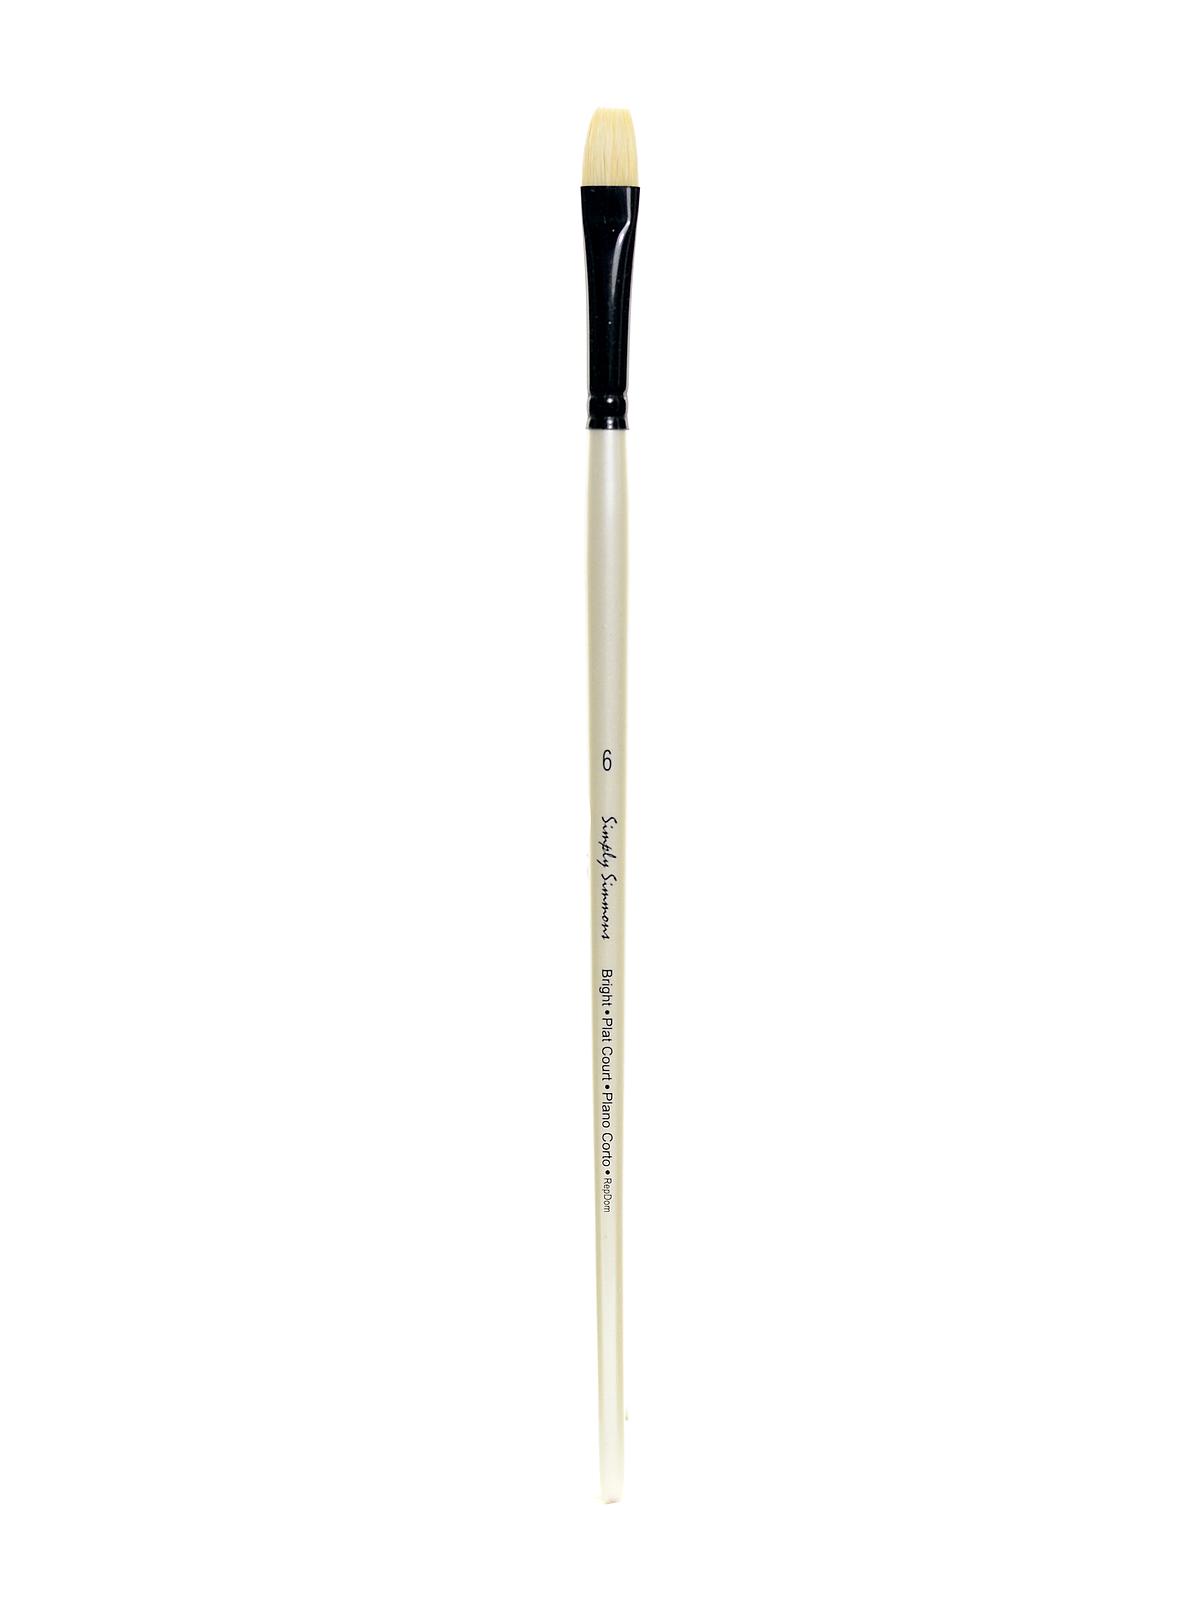 Simply Simmons Long Handle Brushes 6 Bristle Bright